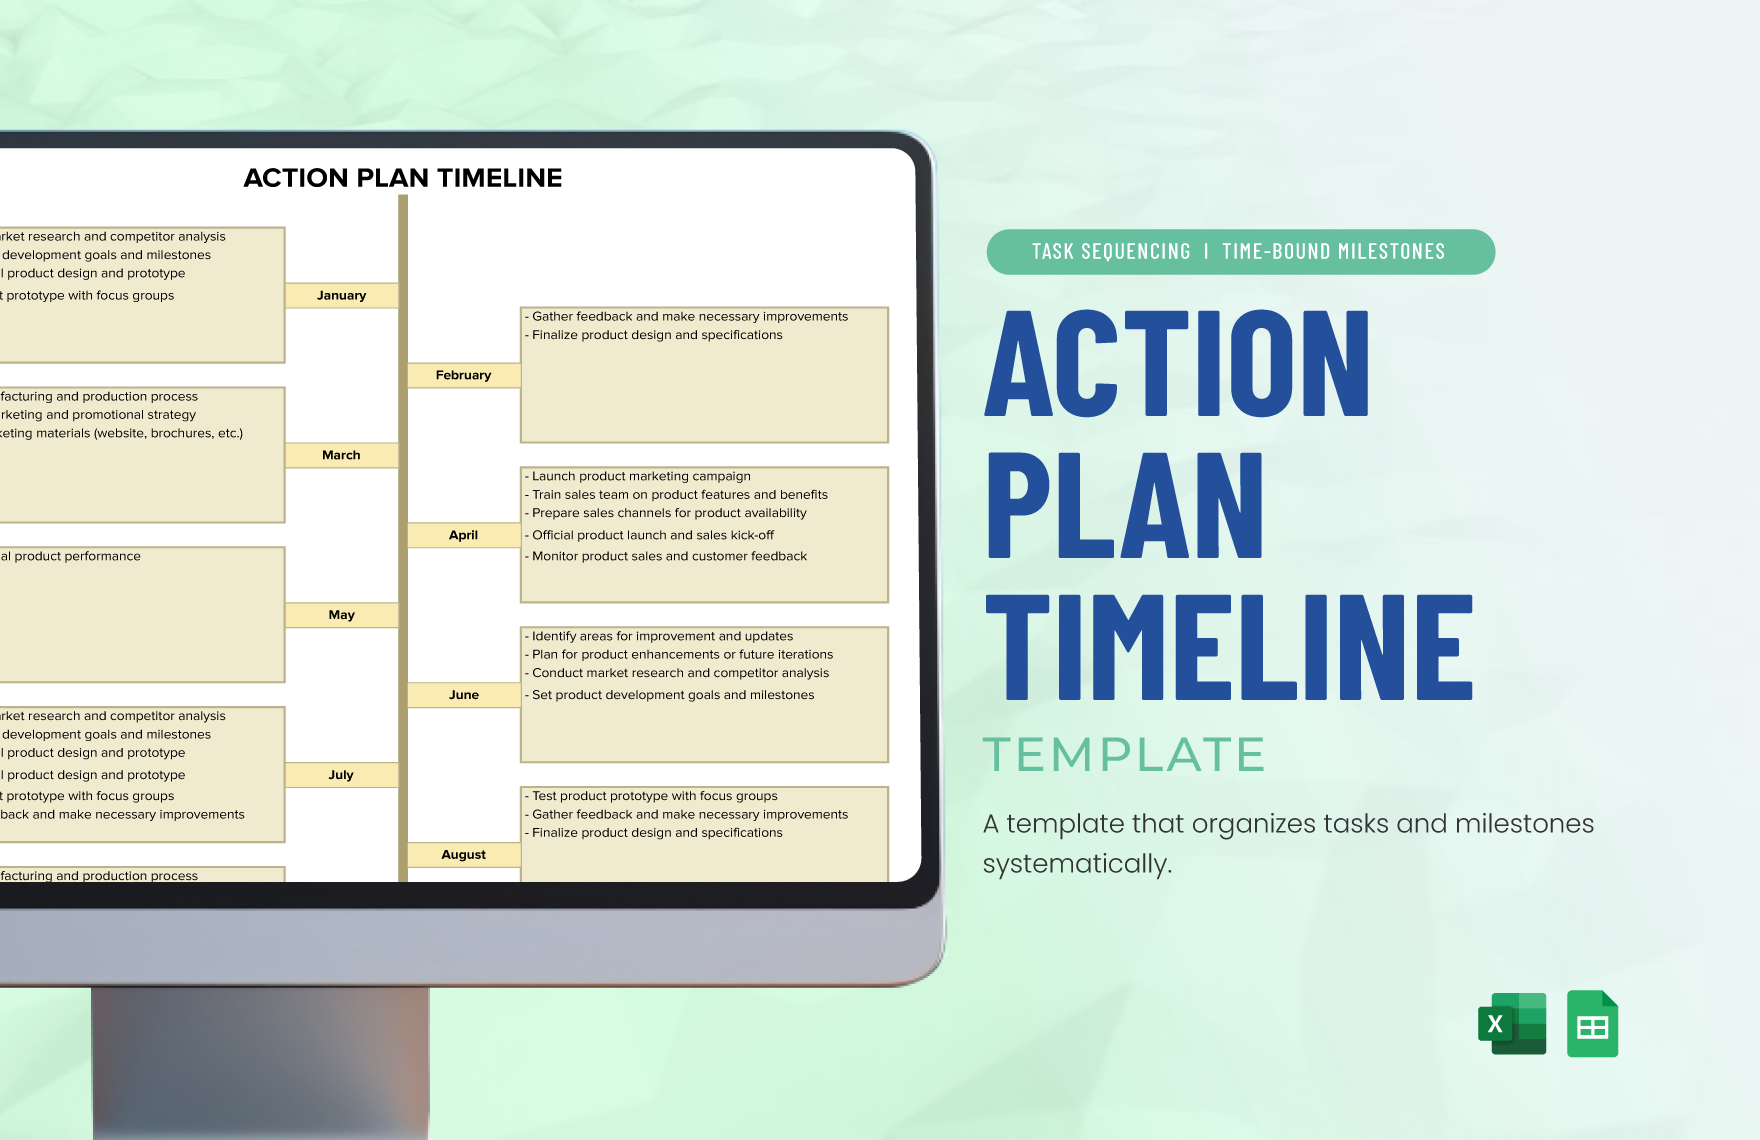 Action Plan Timeline Template